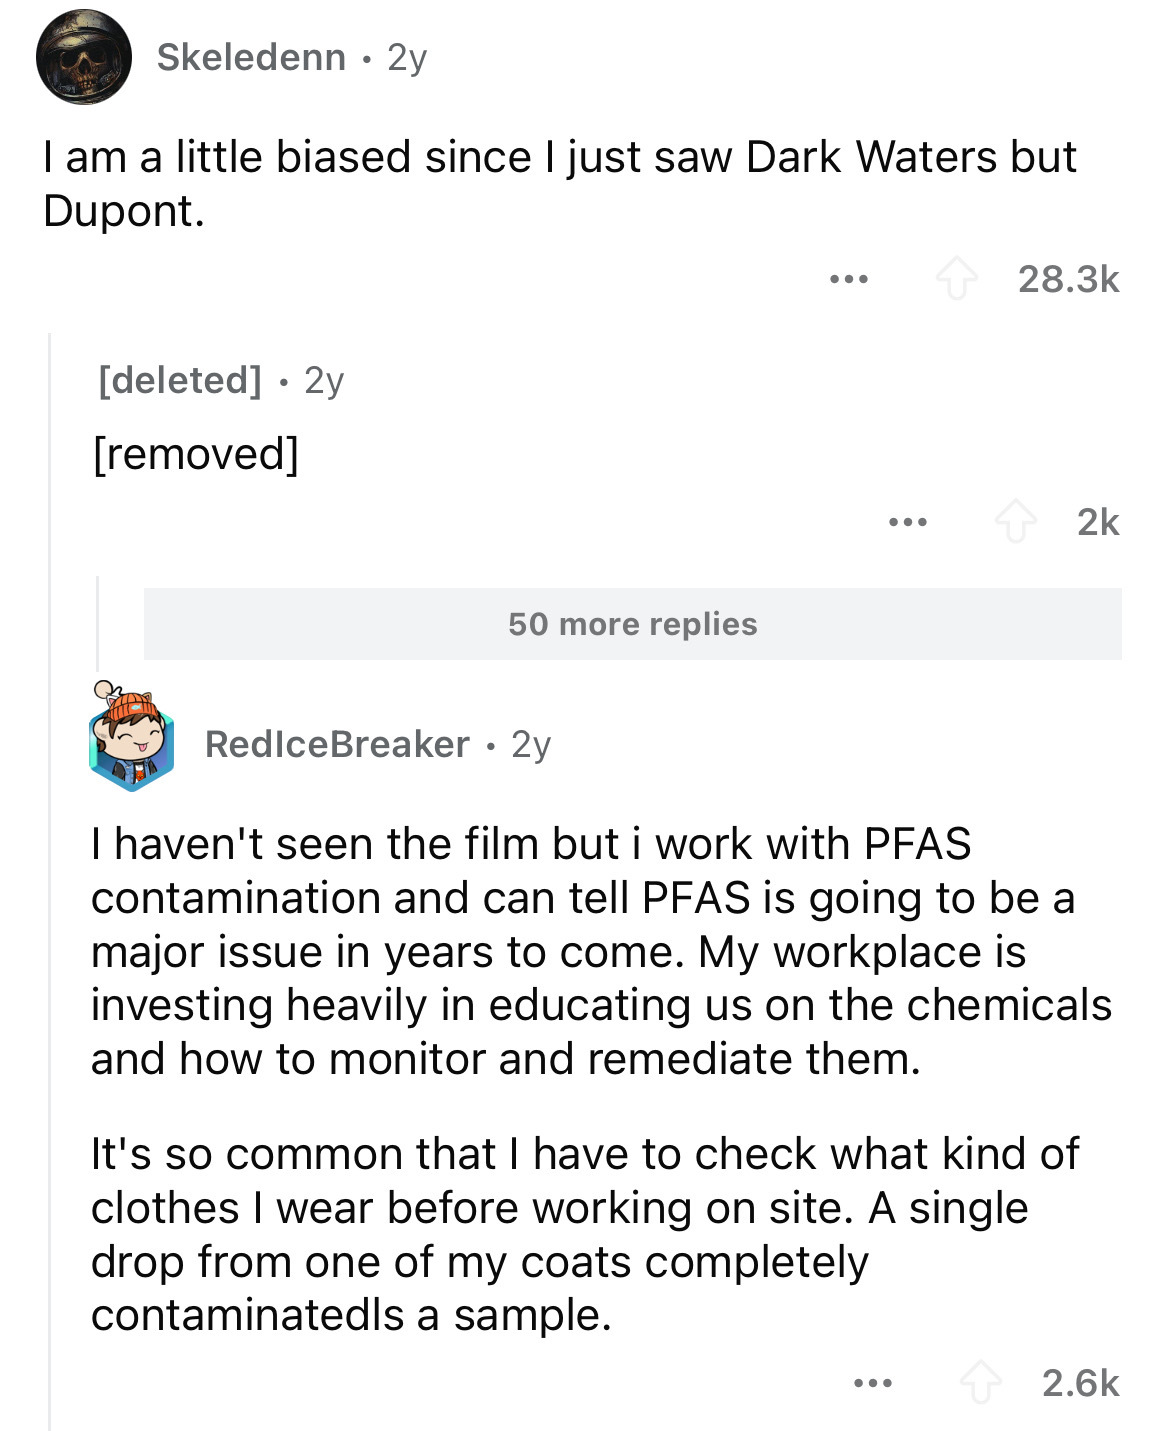 screenshot - Skeledenn 2y I am a little biased since I just saw Dark Waters but Dupont. deleted 2y removed ... 2k 50 more replies RedlceBreaker 2y I haven't seen the film but i work with Pfas contamination and can tell Pfas is going to be a major issue in